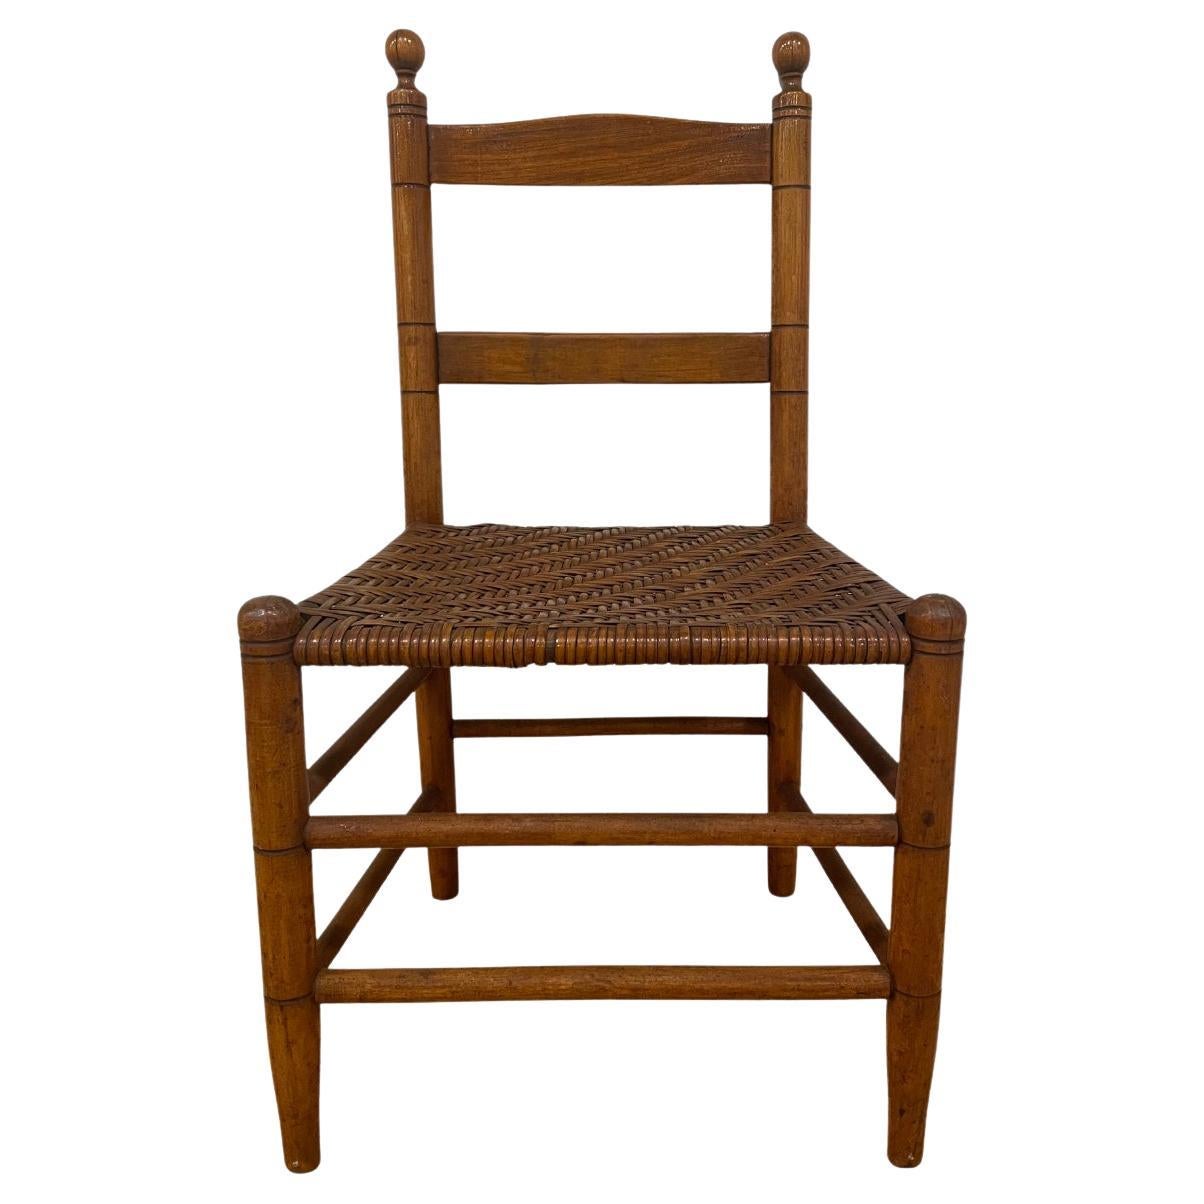 Antique American Ladder Back Child's Chair with Woven Seat For Sale